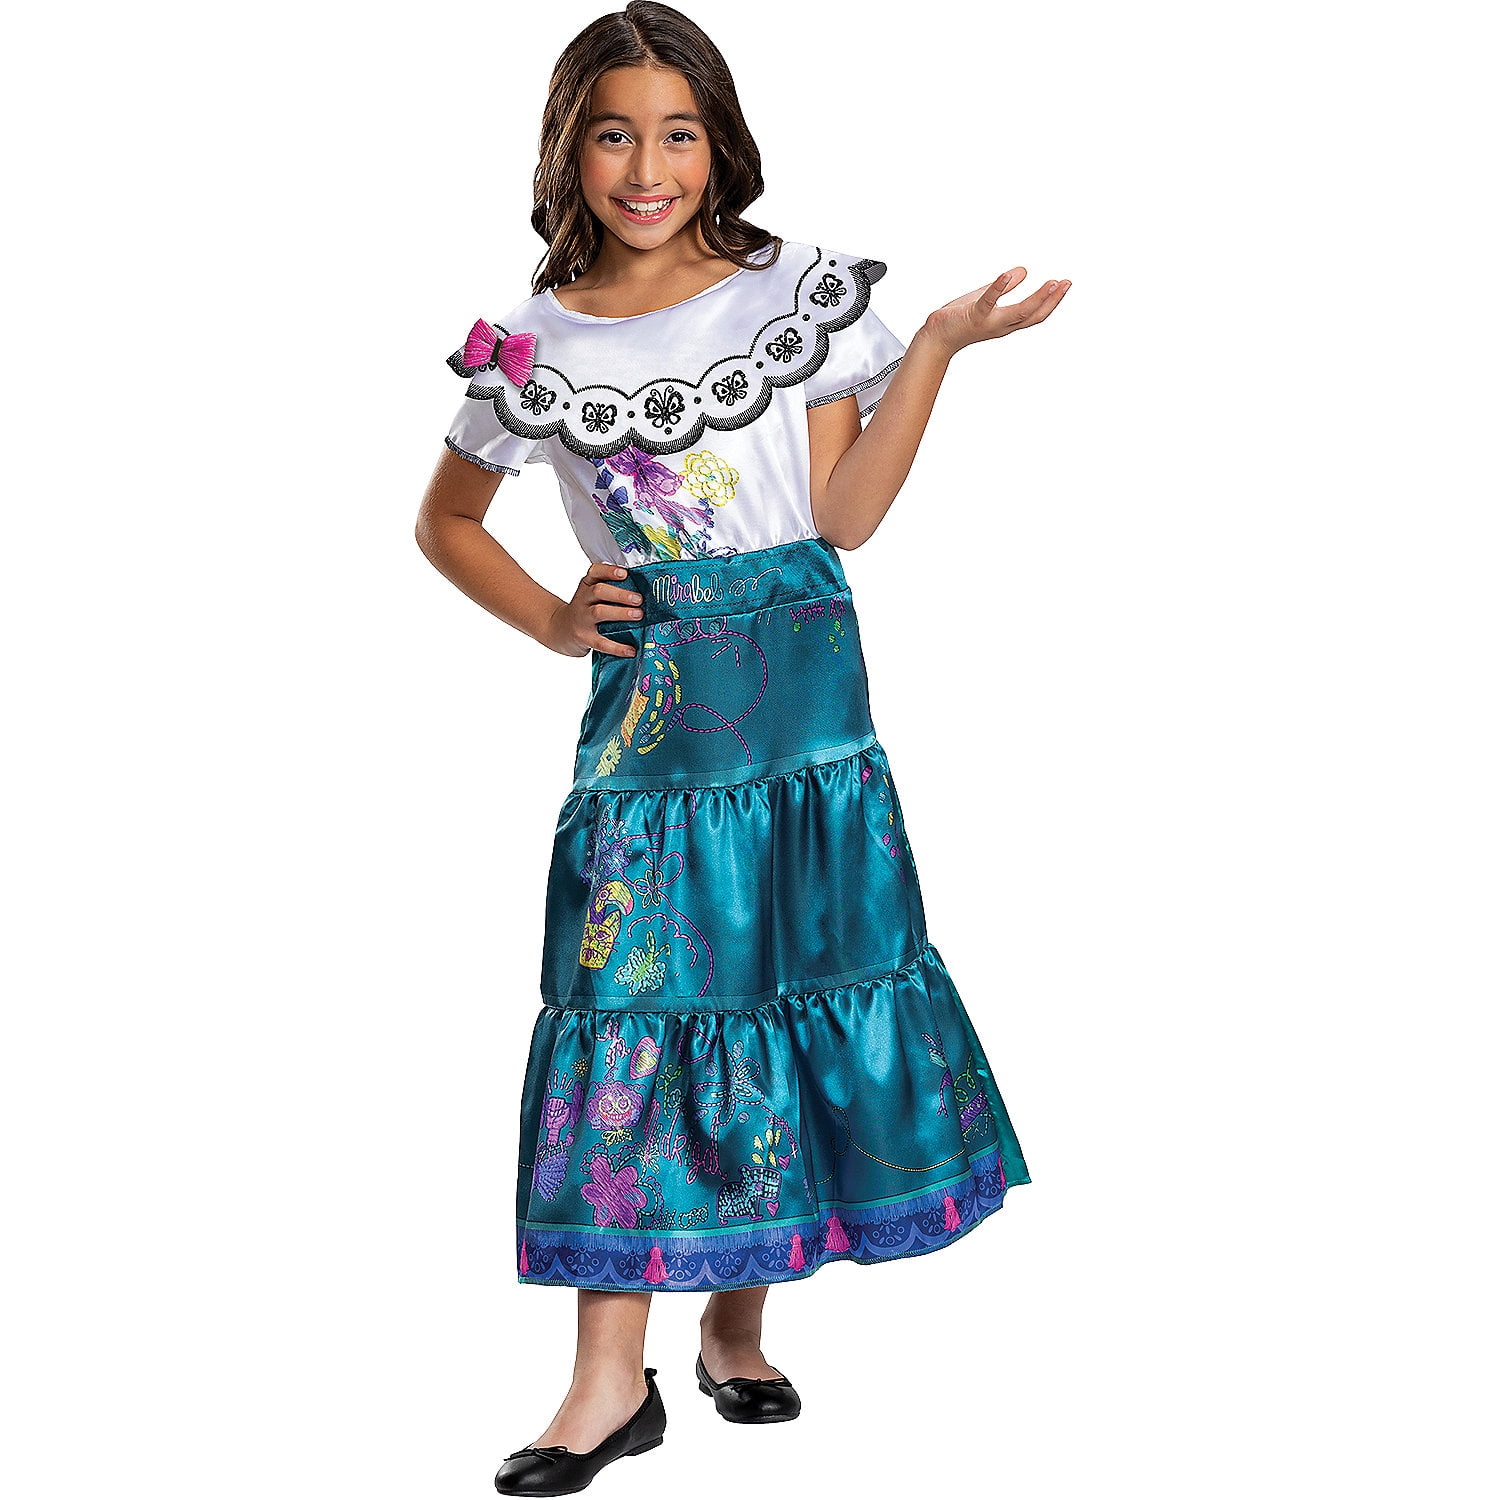  Disney Encanto Mirabel Dress, Costume for Girls Ages 3 and up,  Outfit Fits Children Sizes 4-6X : Video Games